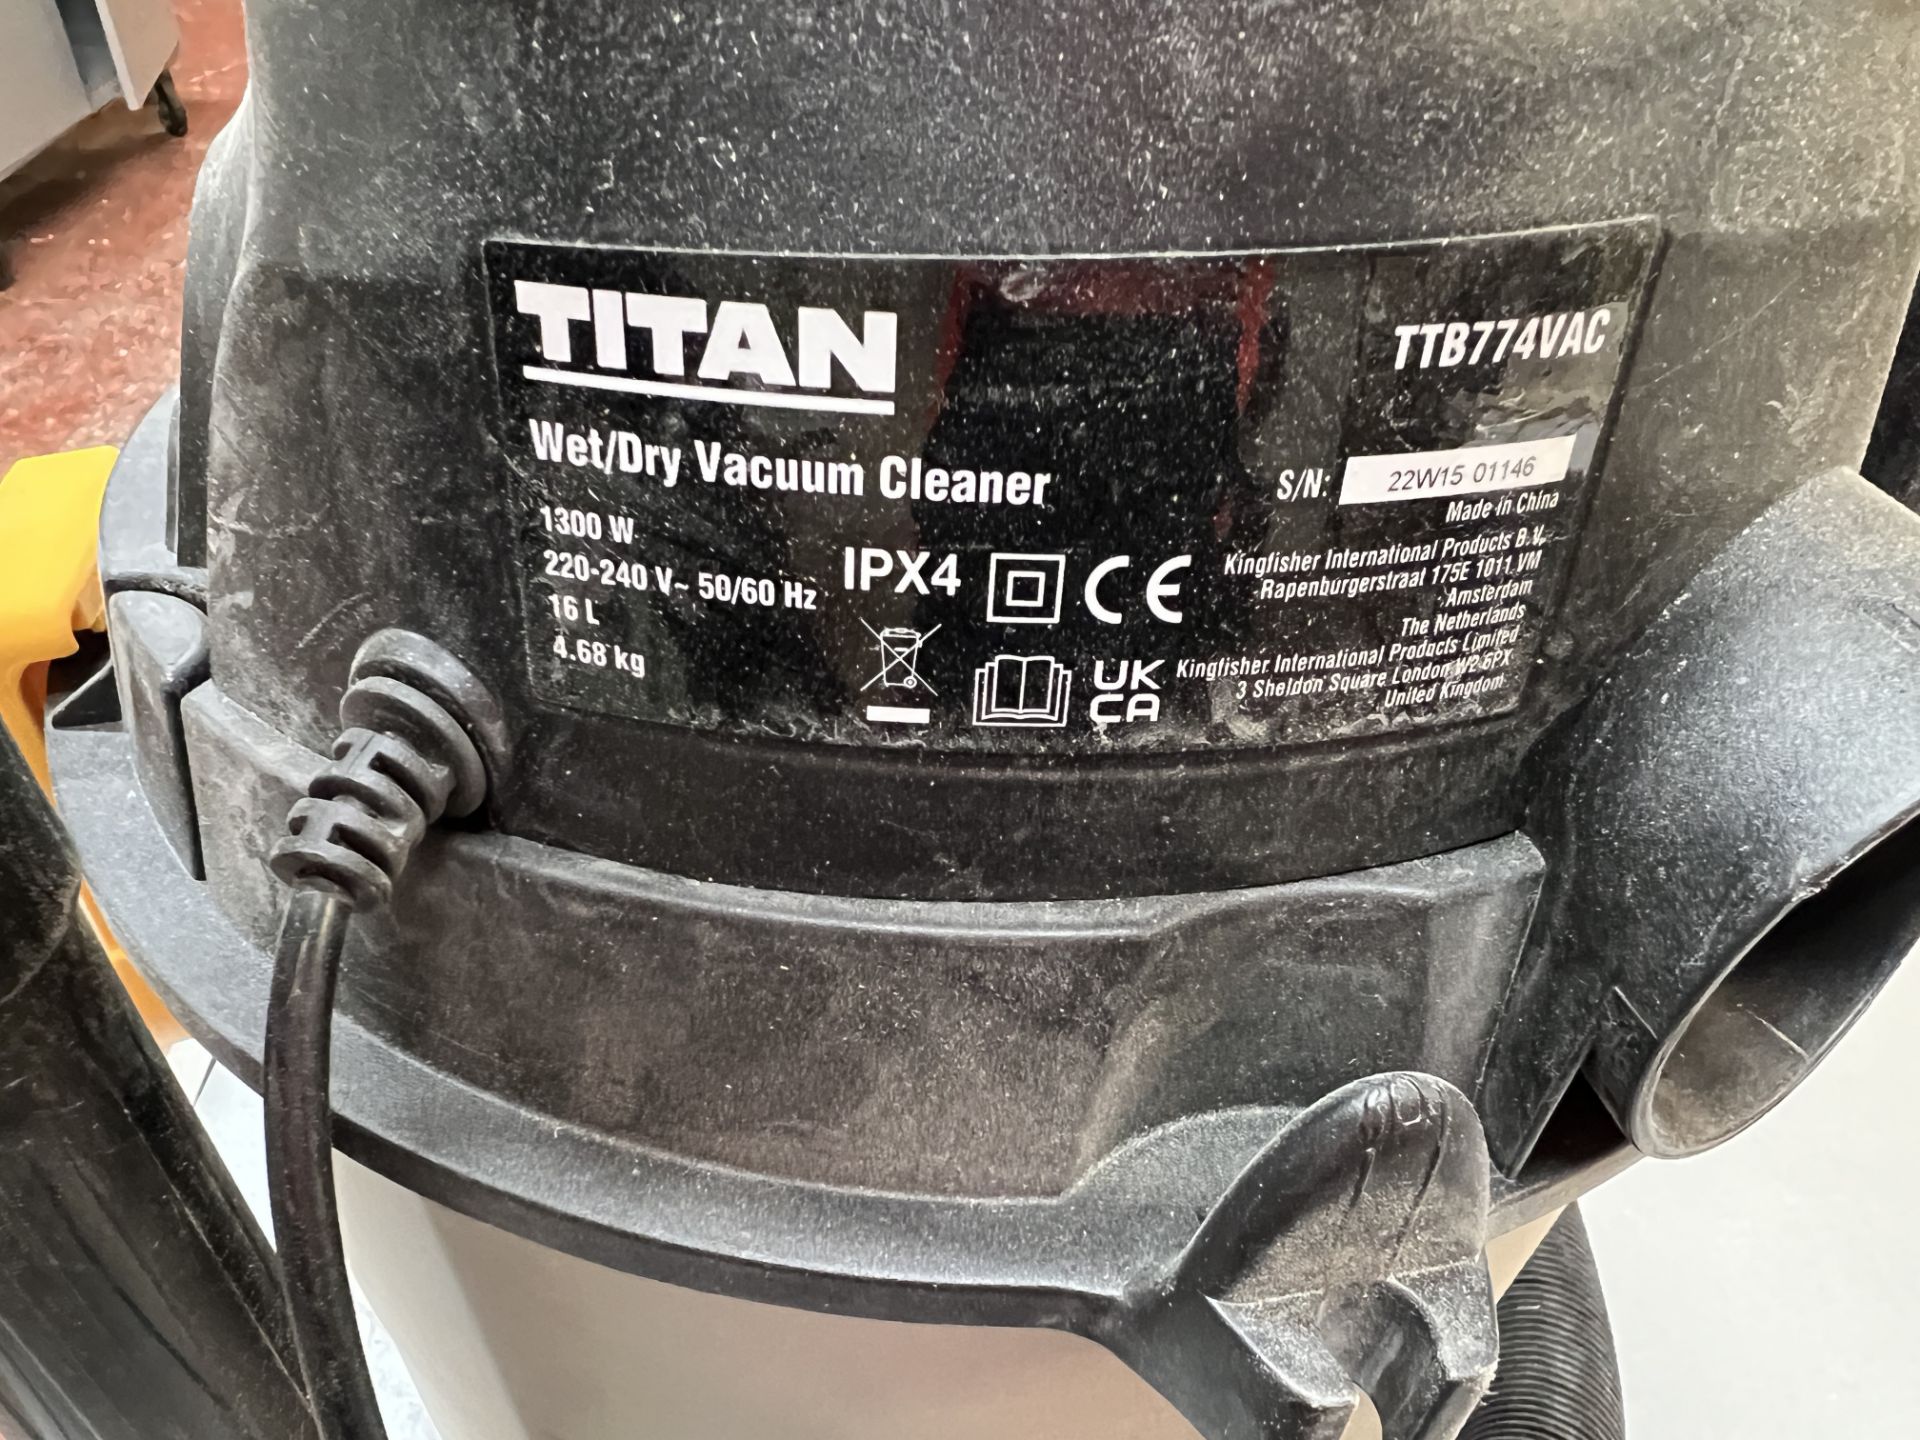 Titan TTB774VAC wet and dry 16 Lts vacuum cleaner, 220-240 volts S/No 22W1501146, location Manor - Image 2 of 3